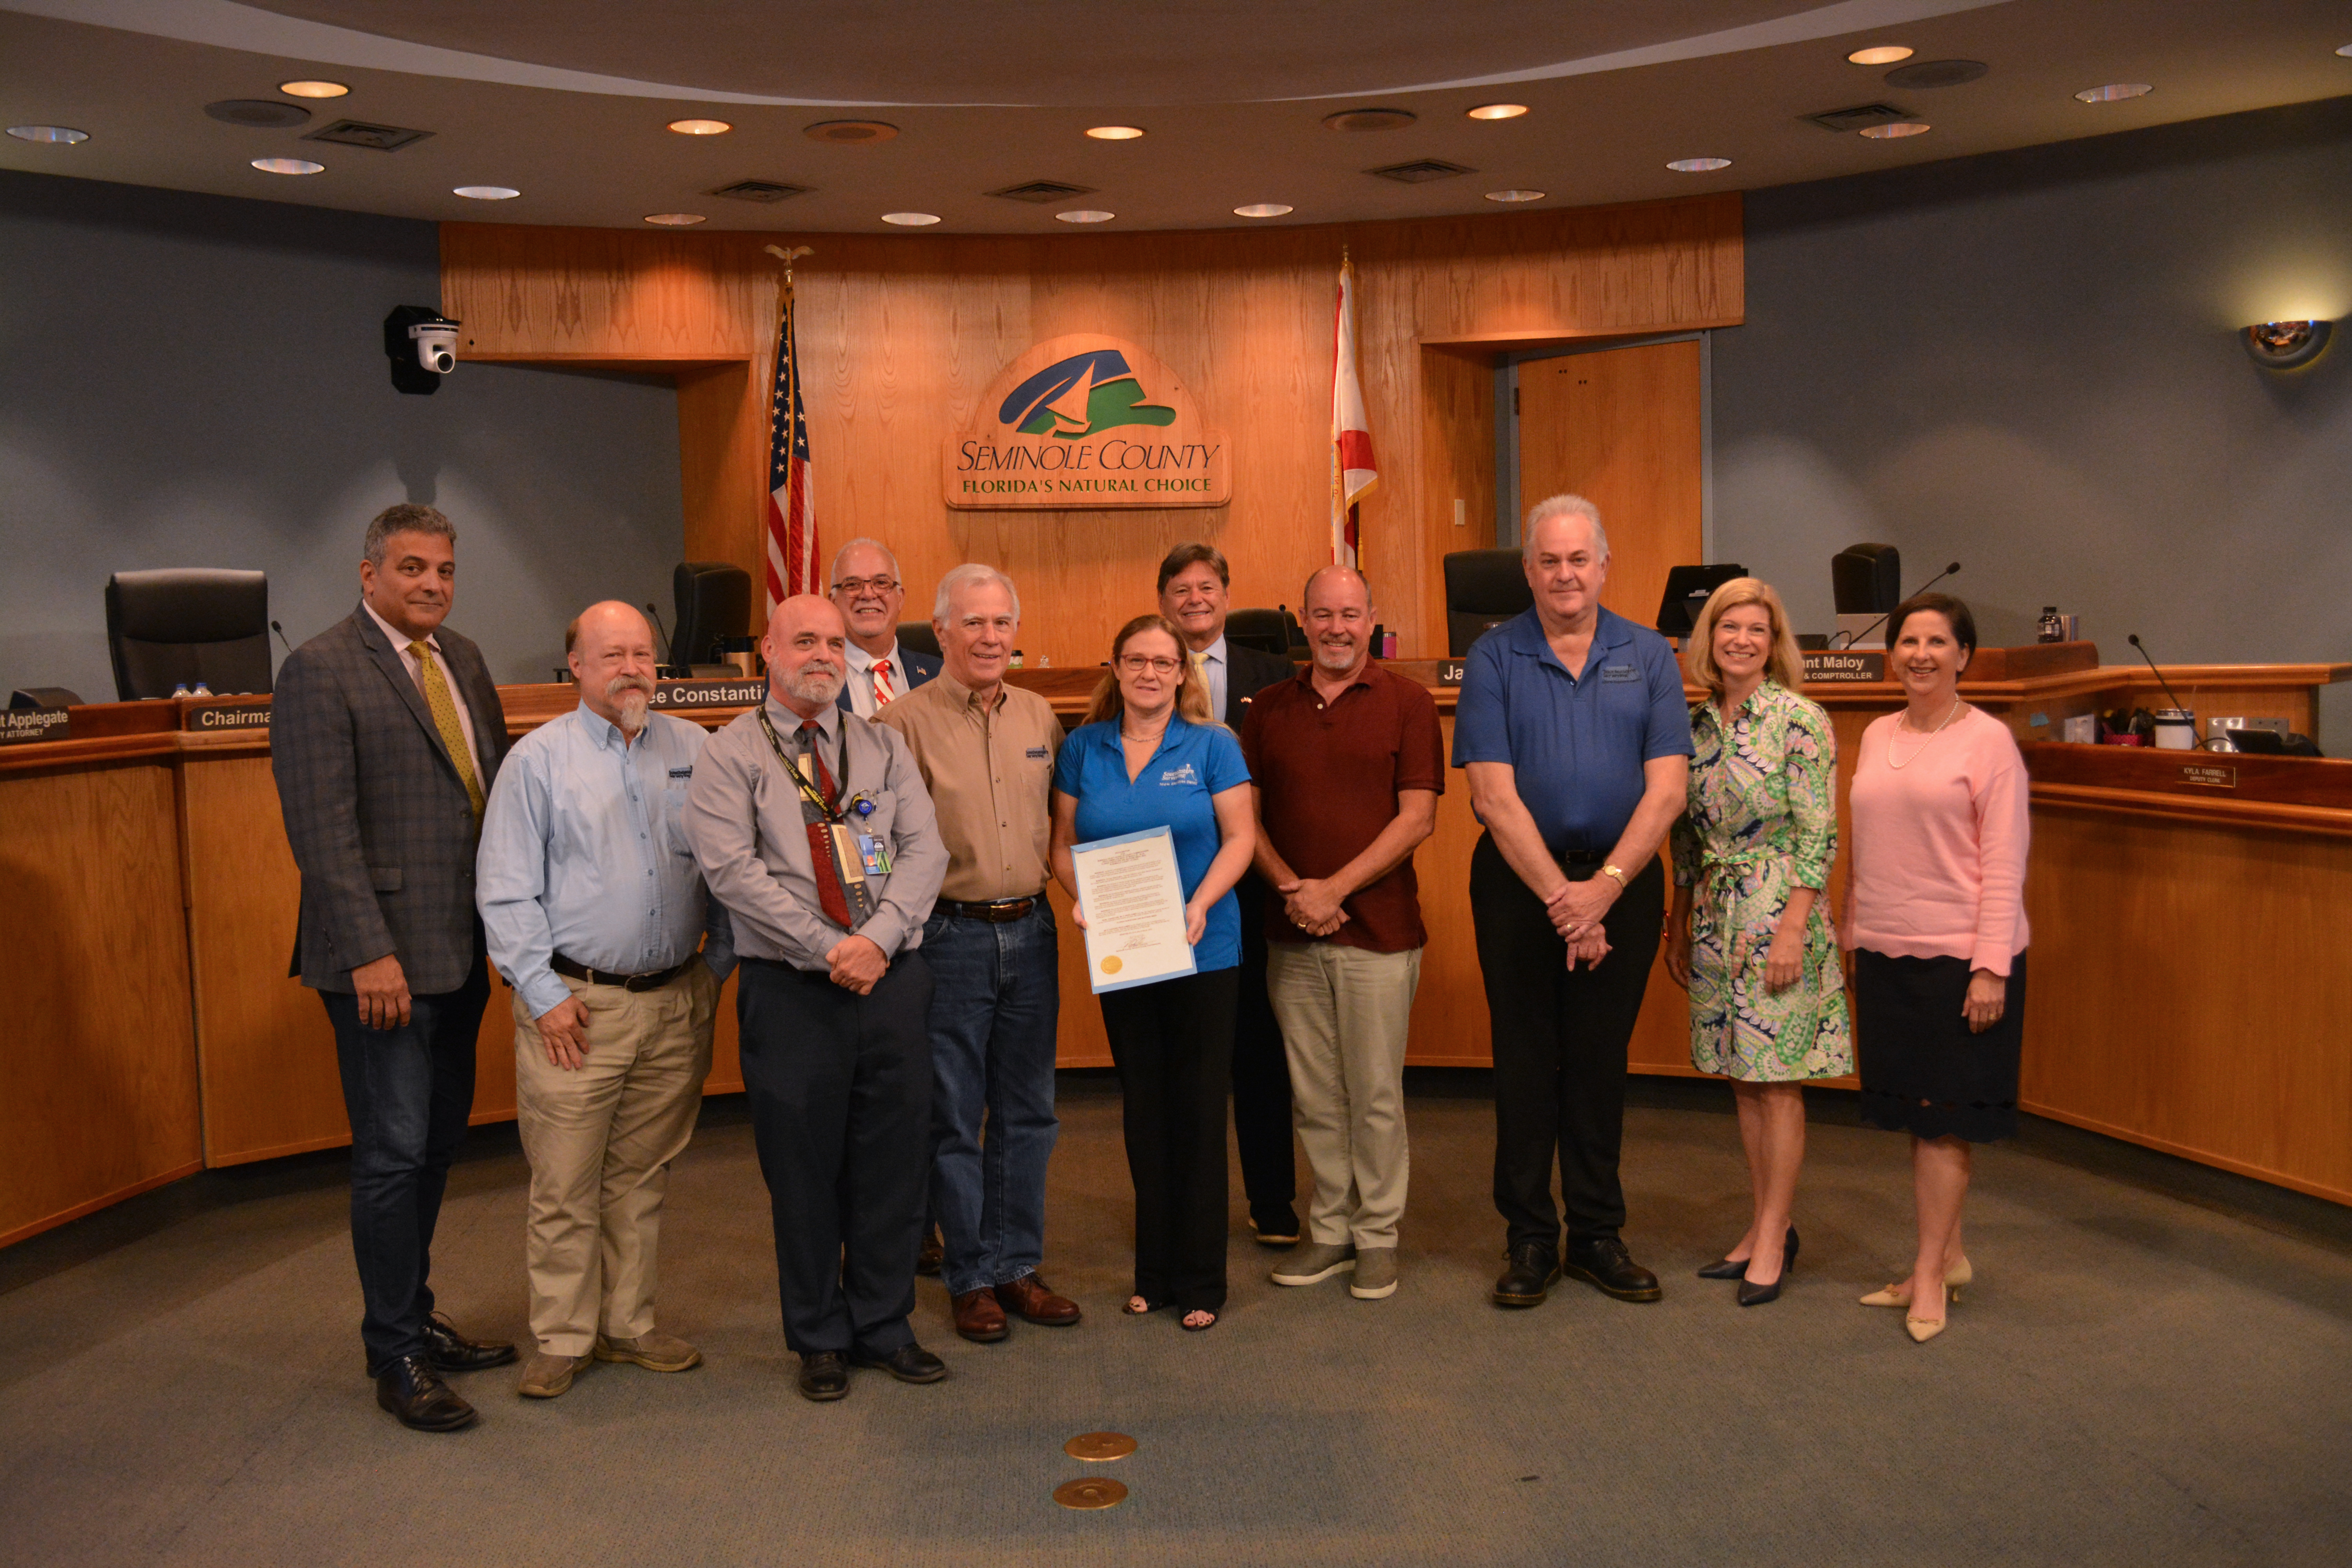 Proclamation — Proclaiming the week of March 20-26th as Florida Surveyors and Mappers Week in Seminole County. (Heather Marie Krick, Corporate Marketing Department Southeastern Surveying and Mapping Corp.) 